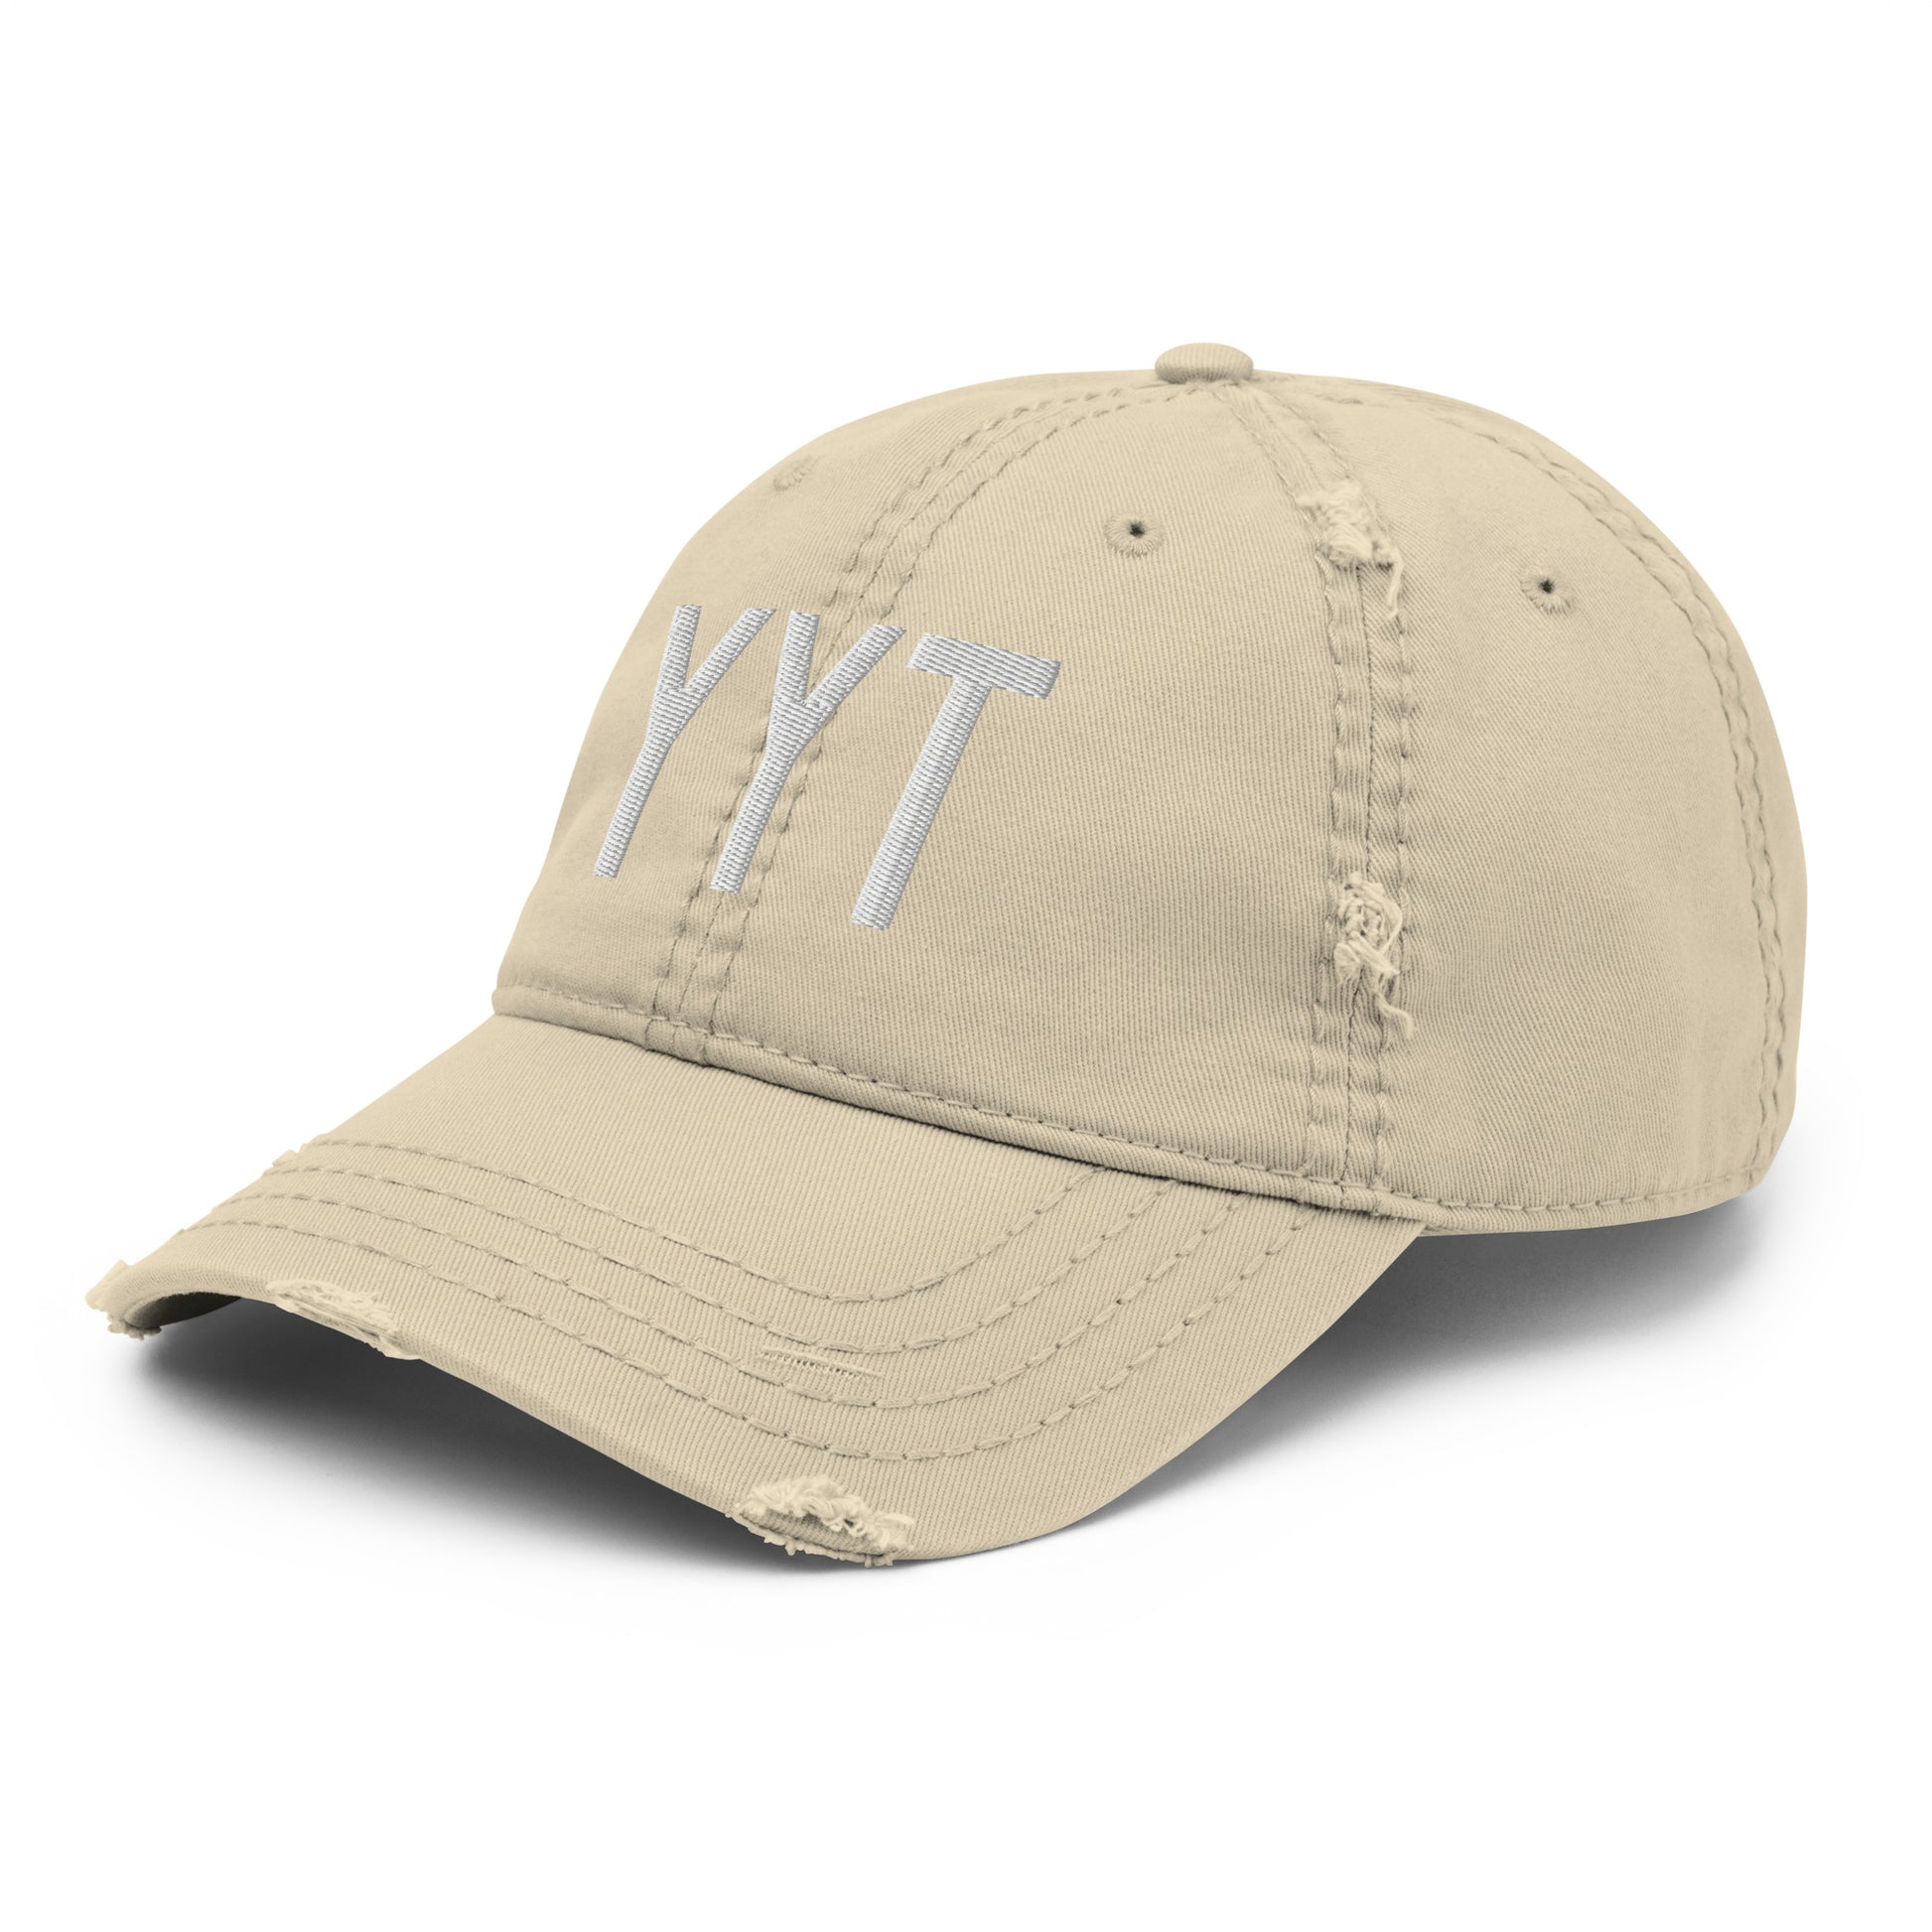 Airport Code Distressed Hat - White • YYT St. John's • YHM Designs - Image 19